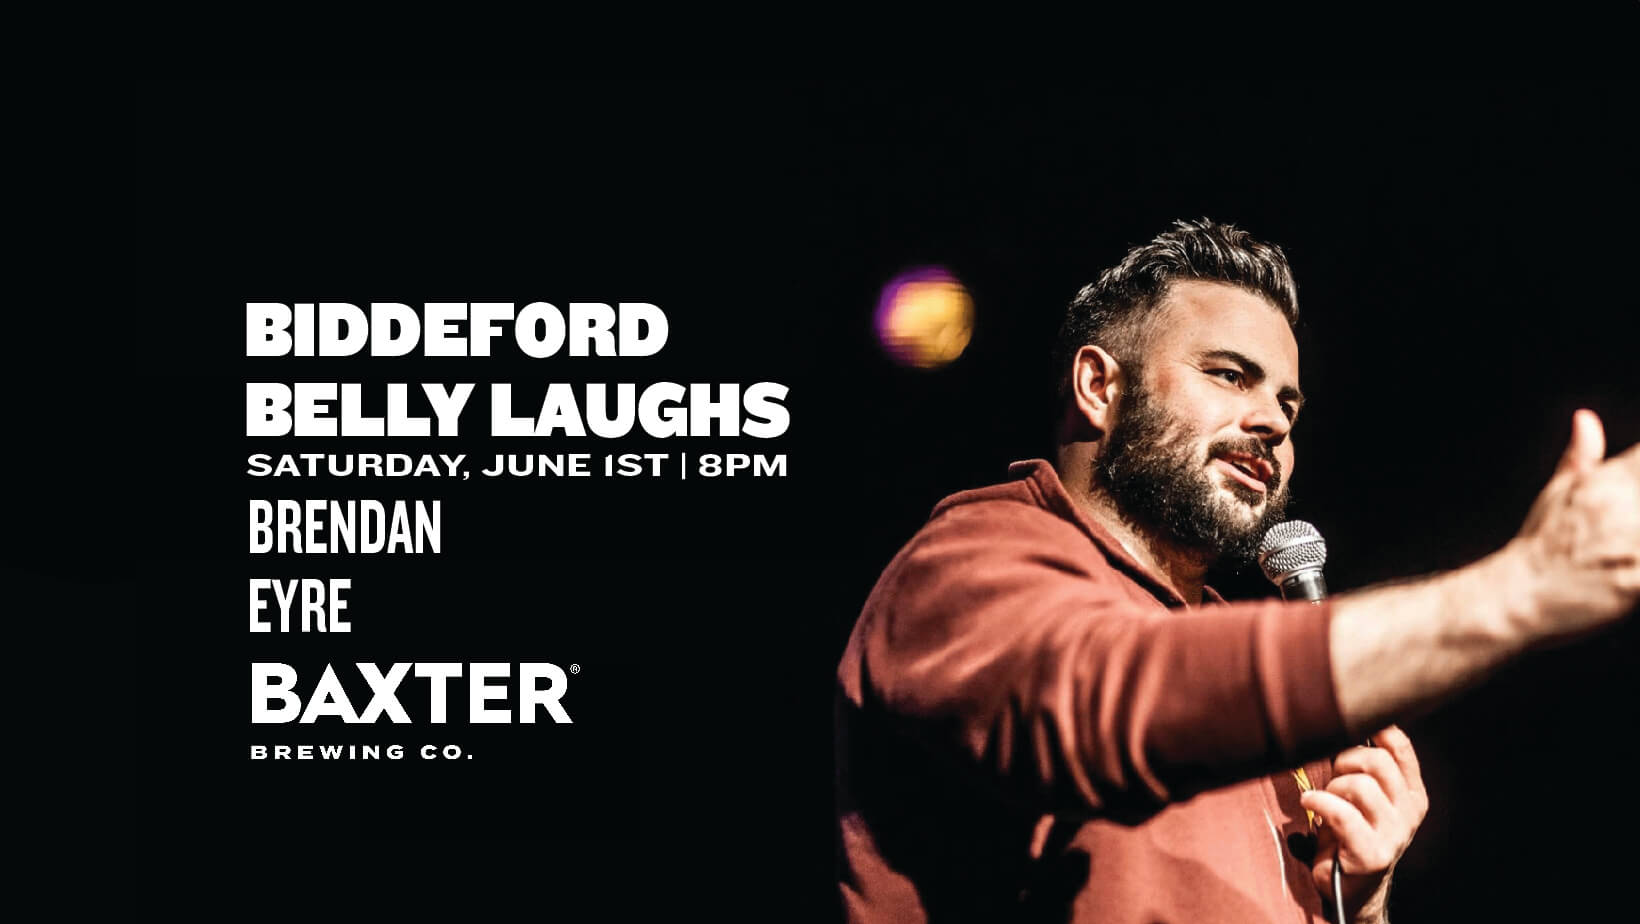 image promoting stand up comedy event, Biddeford Belly Laughs.